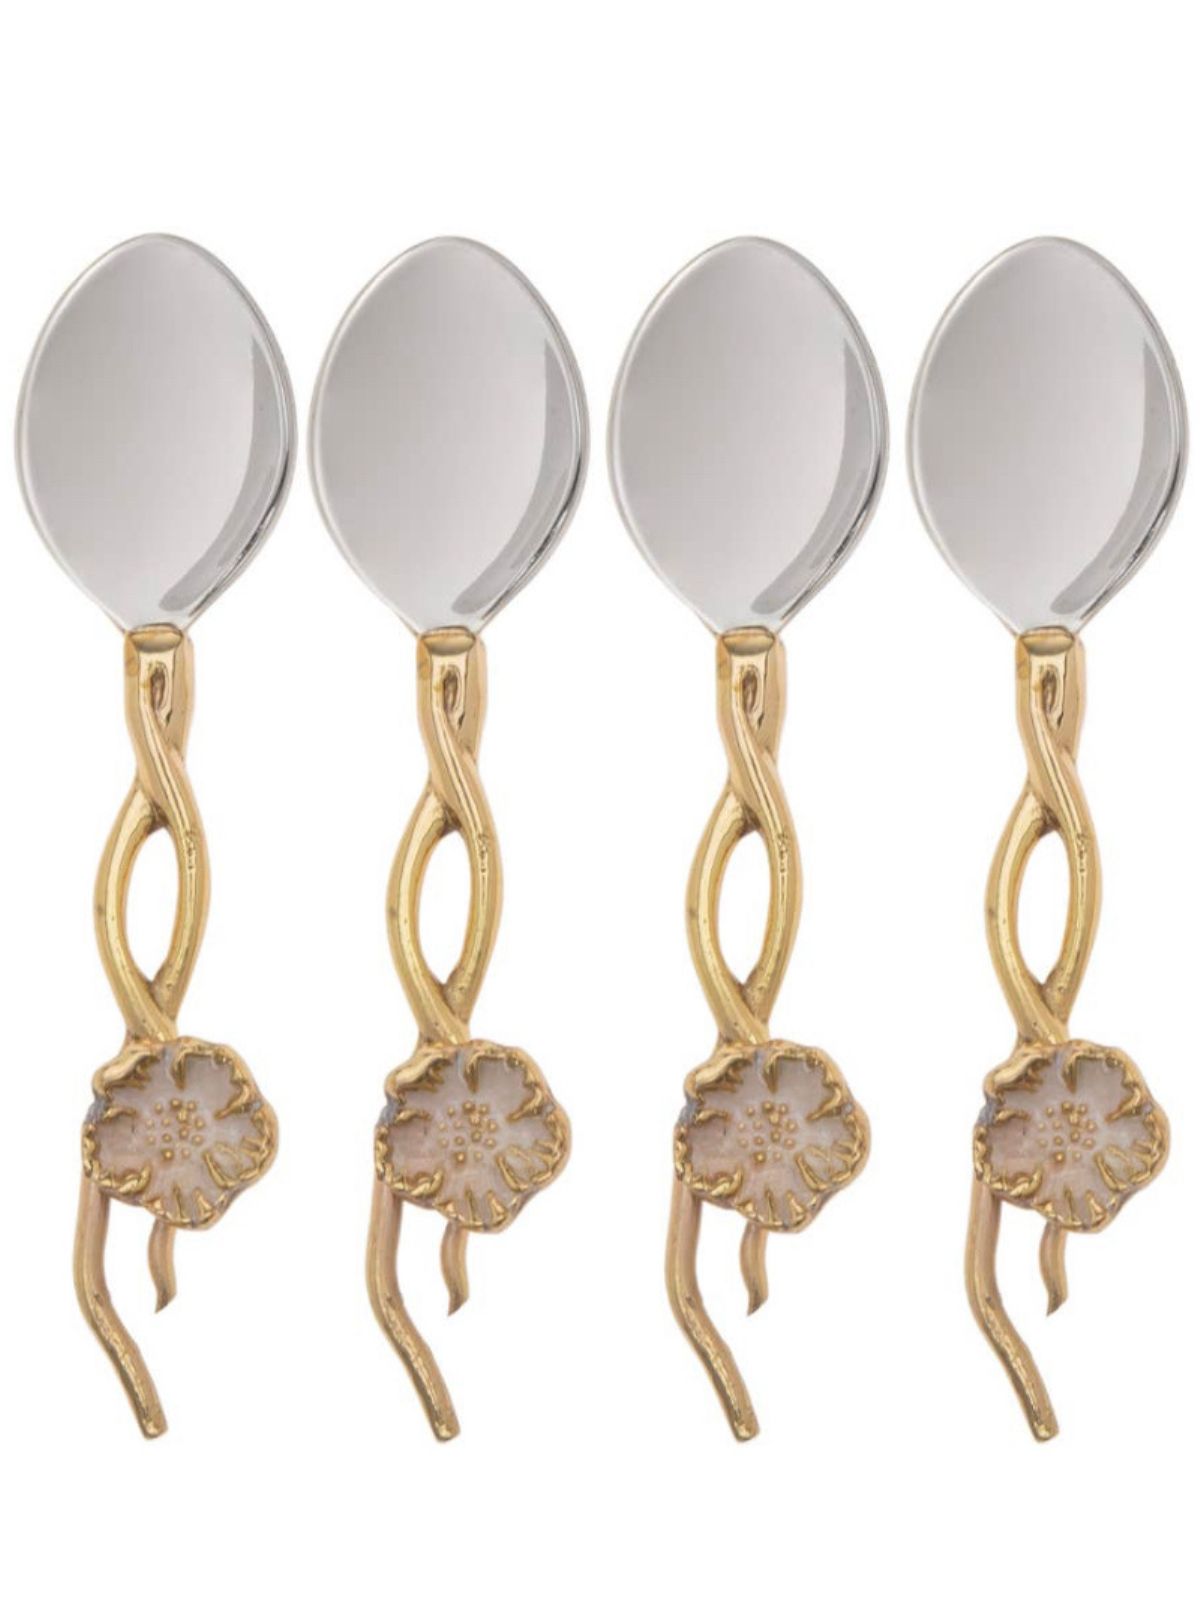 Stainless Steel Dessert Spoons with Gold Flower Handles, Set of 4.